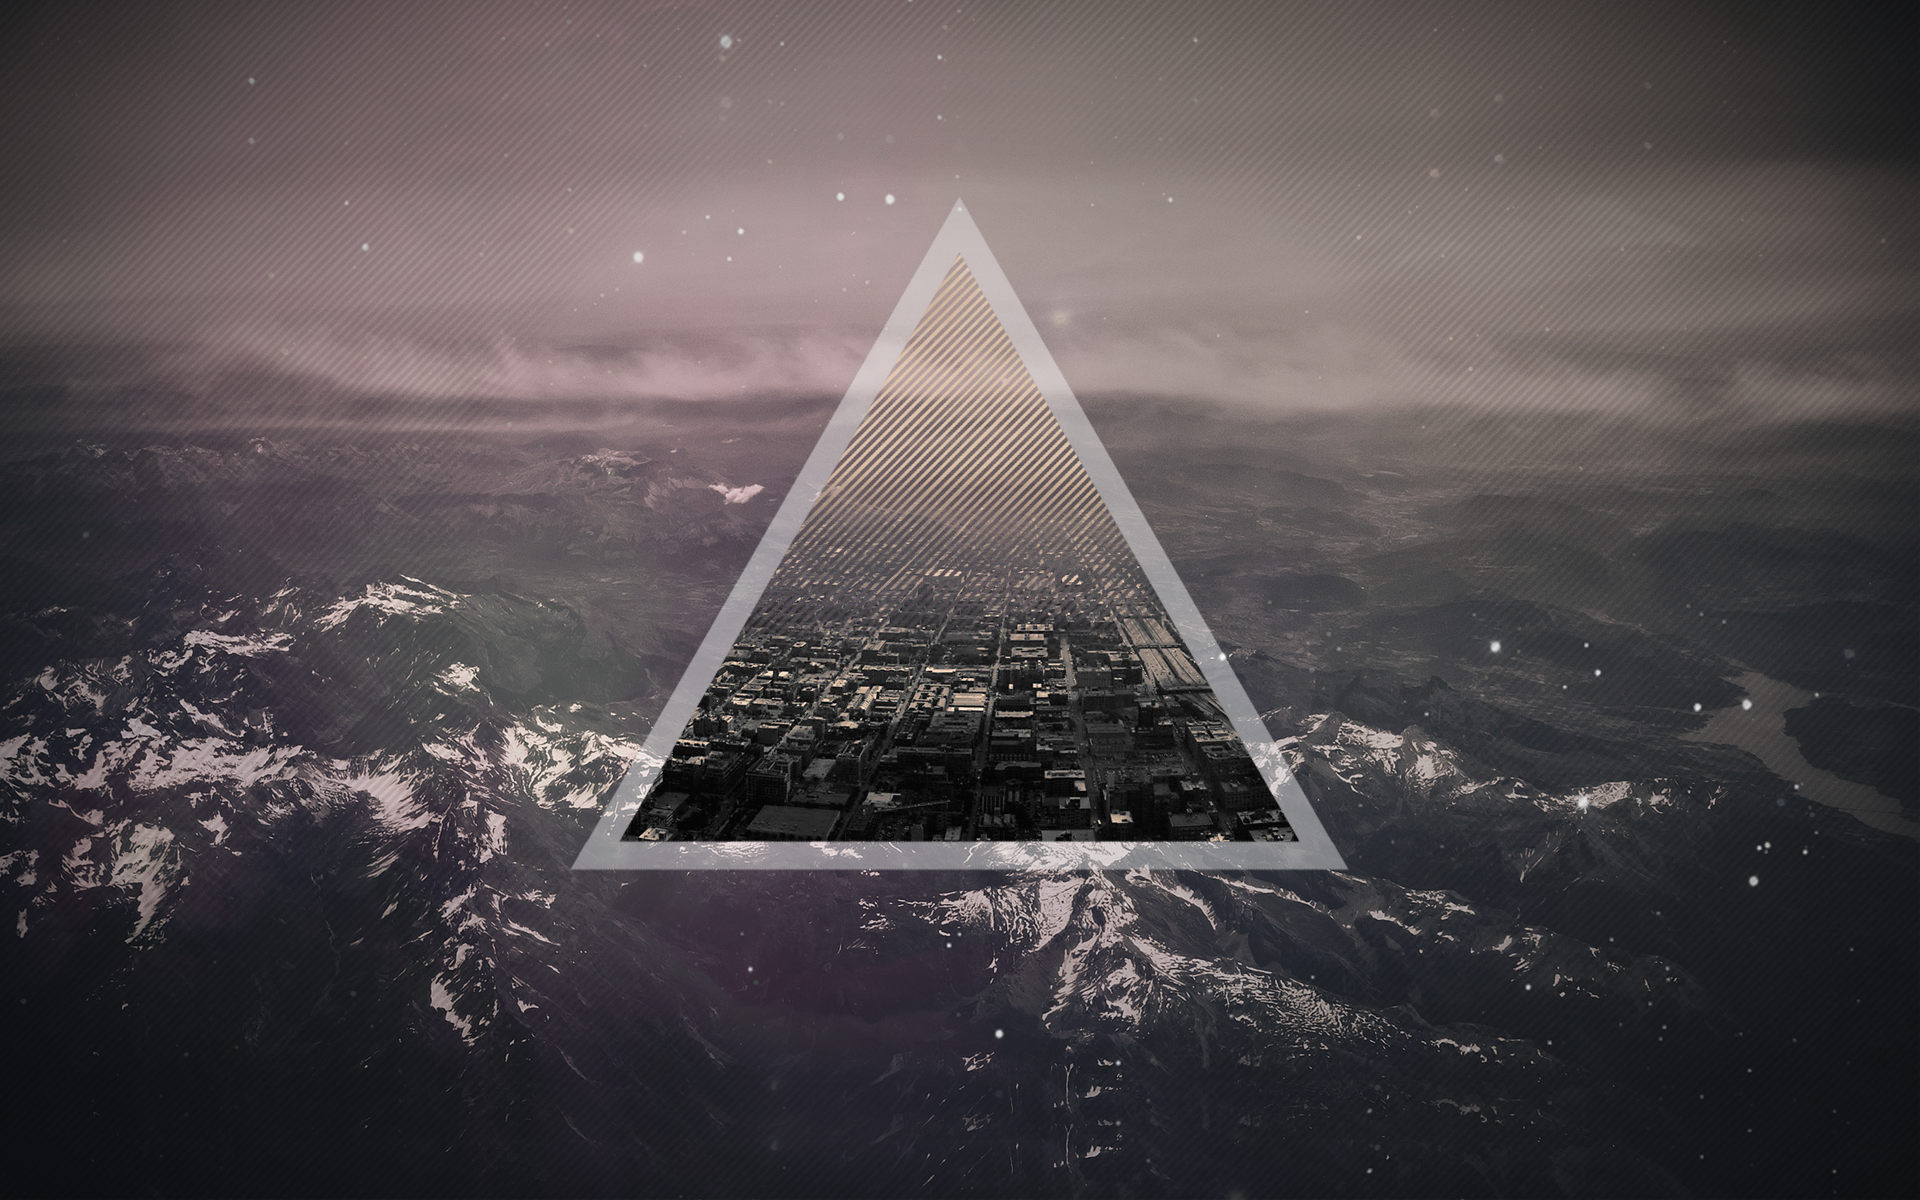  Hipster Triangle Backgrounds Triangle wallpapers image and save